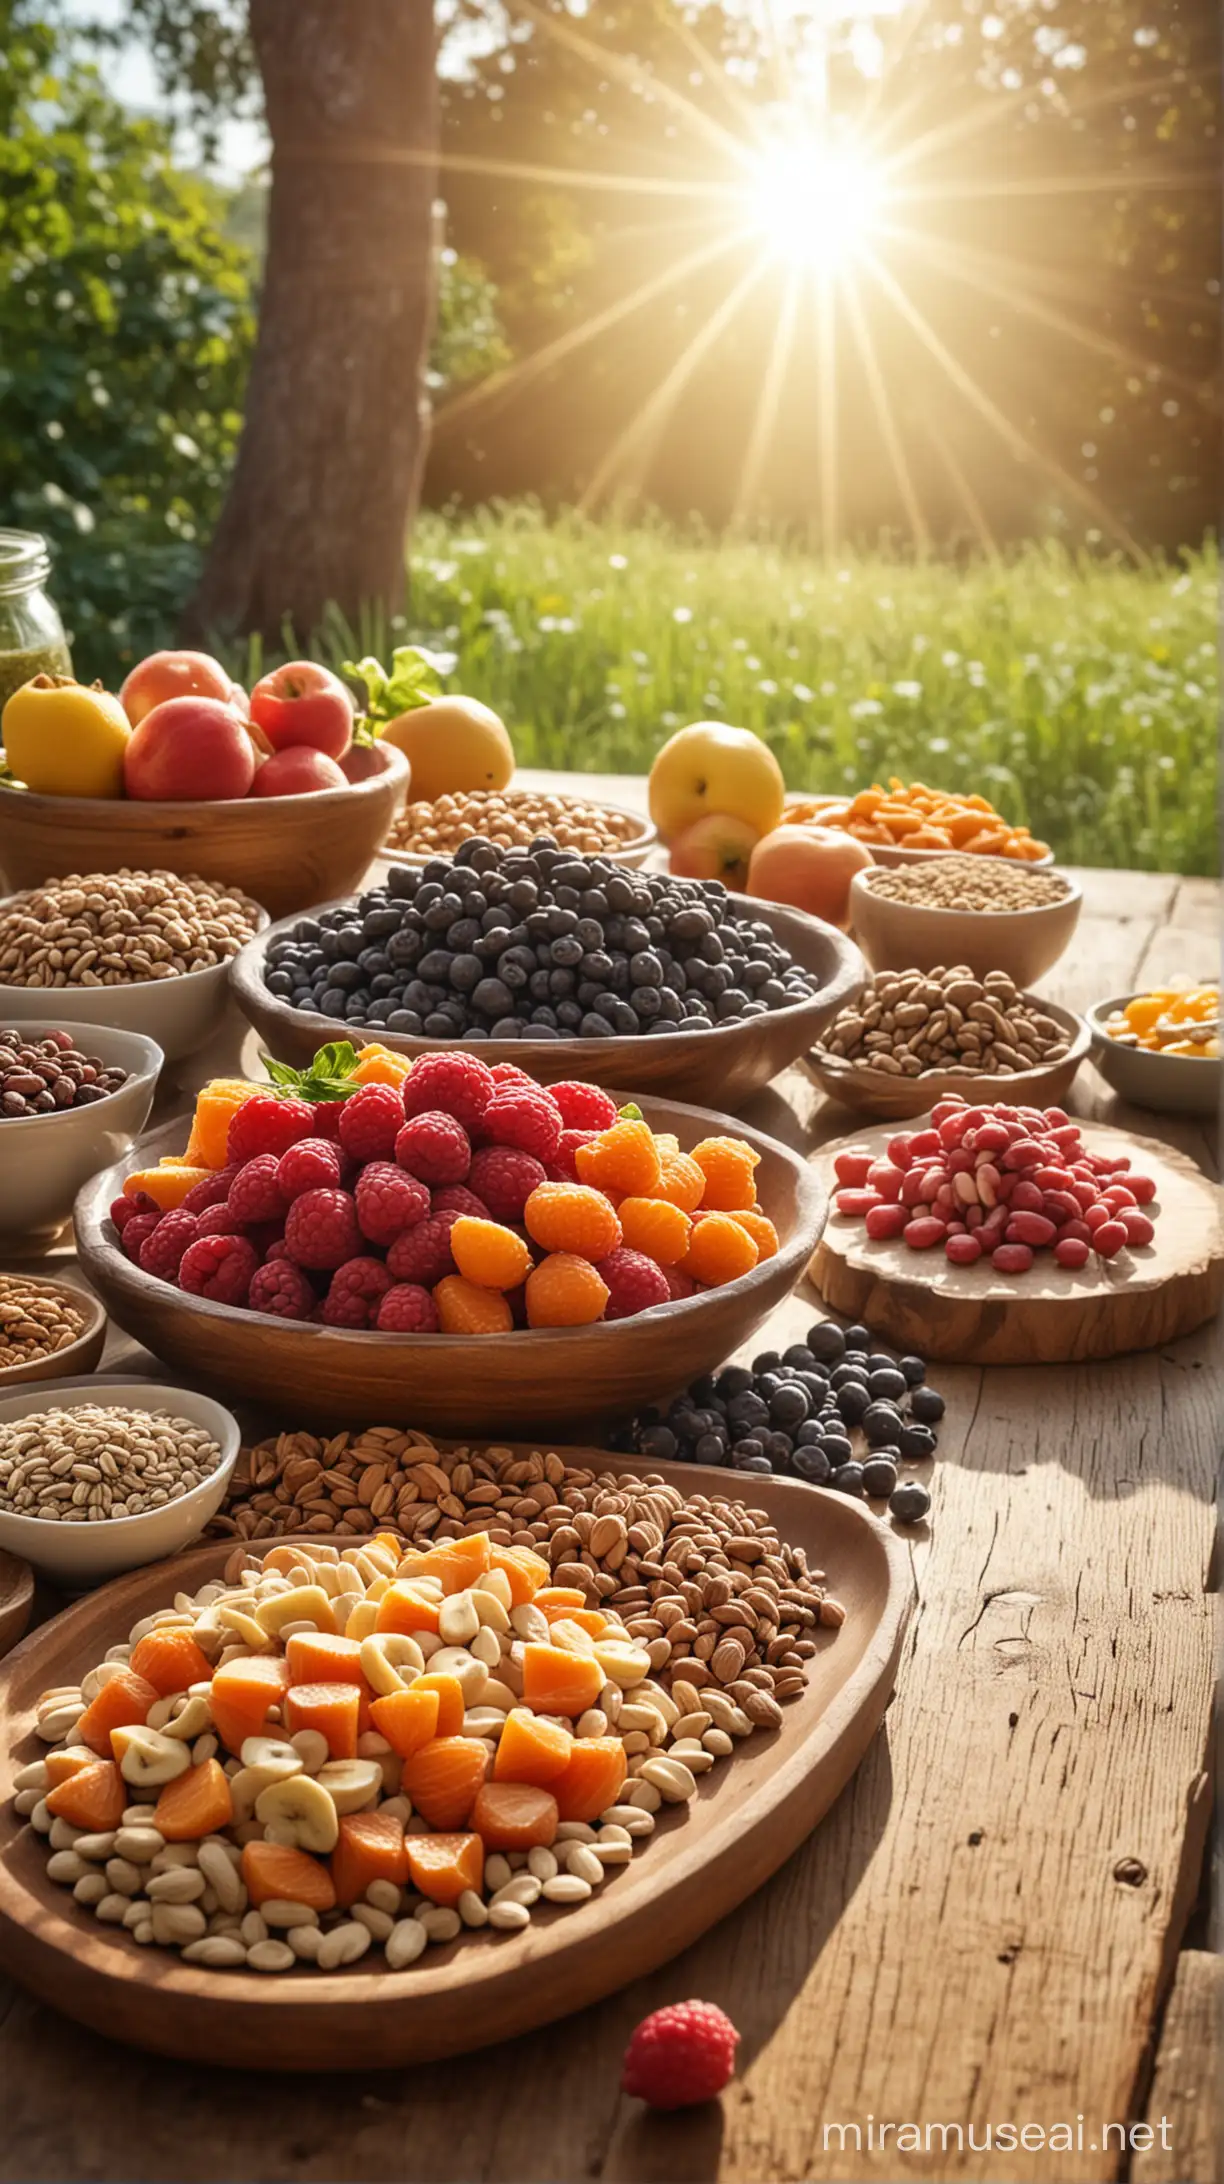 Assorted Superfoods on Table with Natural Background in Morning Sunlight